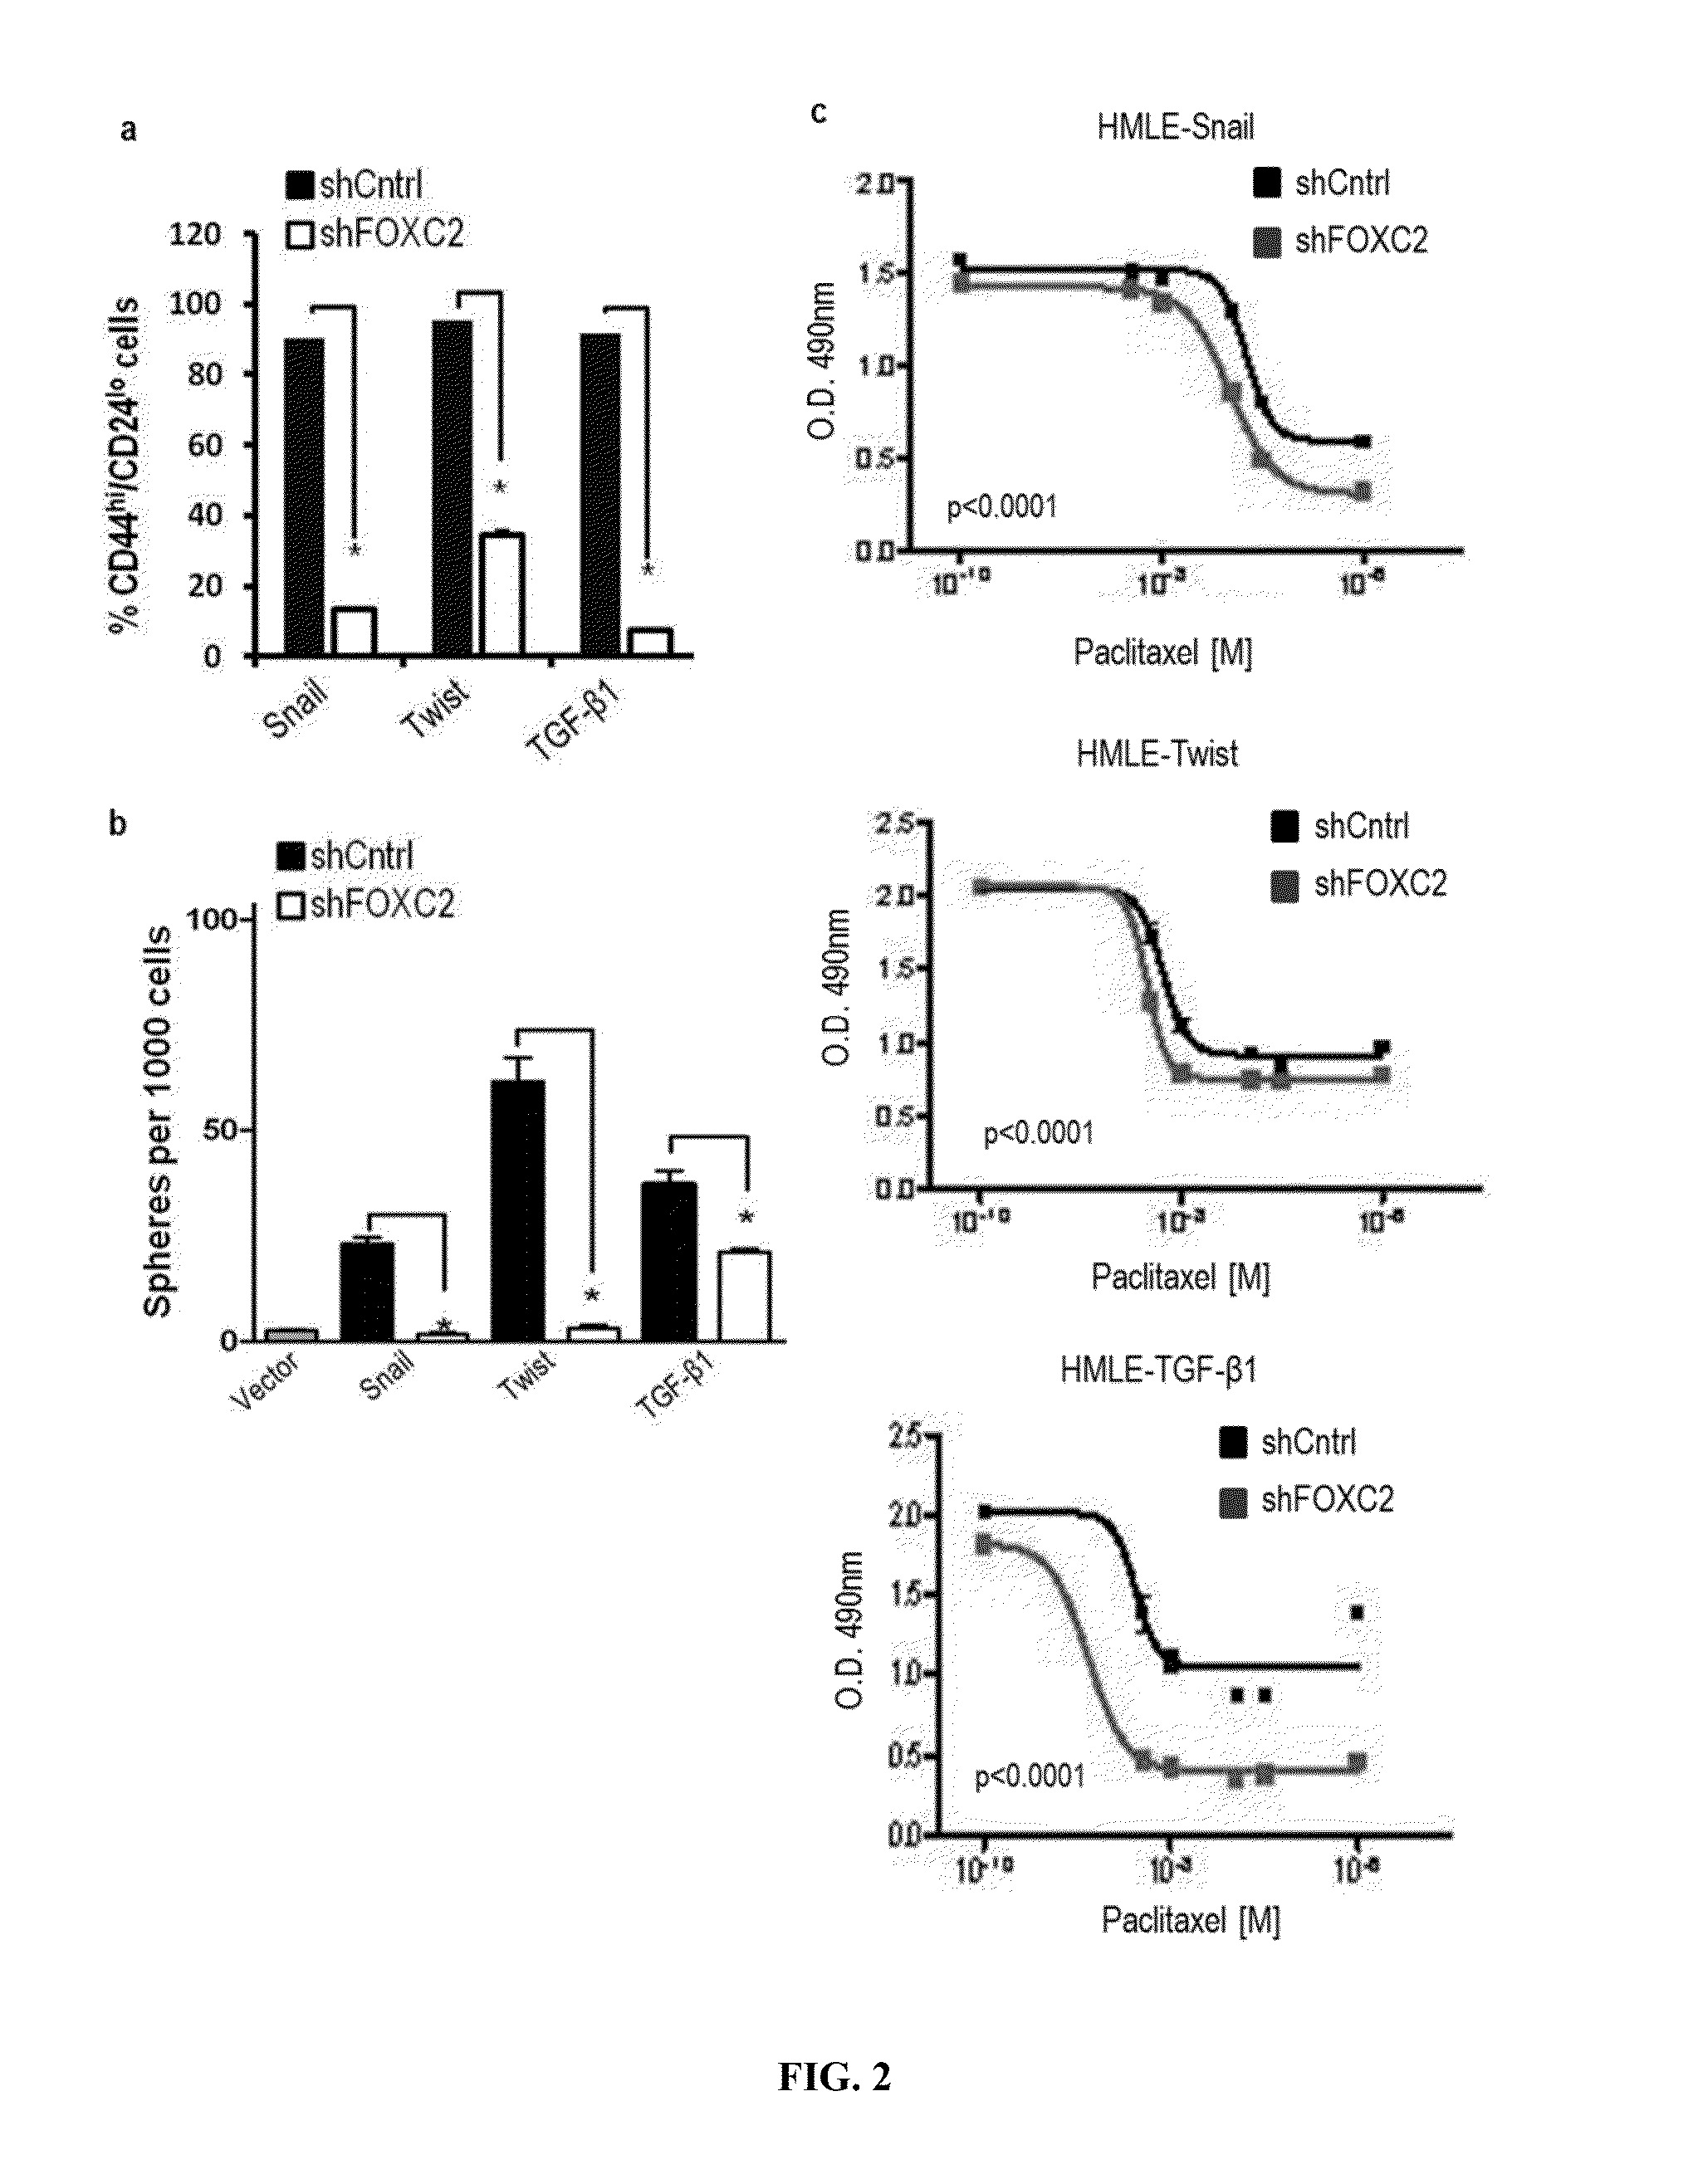 Identification of cancer stem cell markers and use of inhibitors thereof to treat cancer